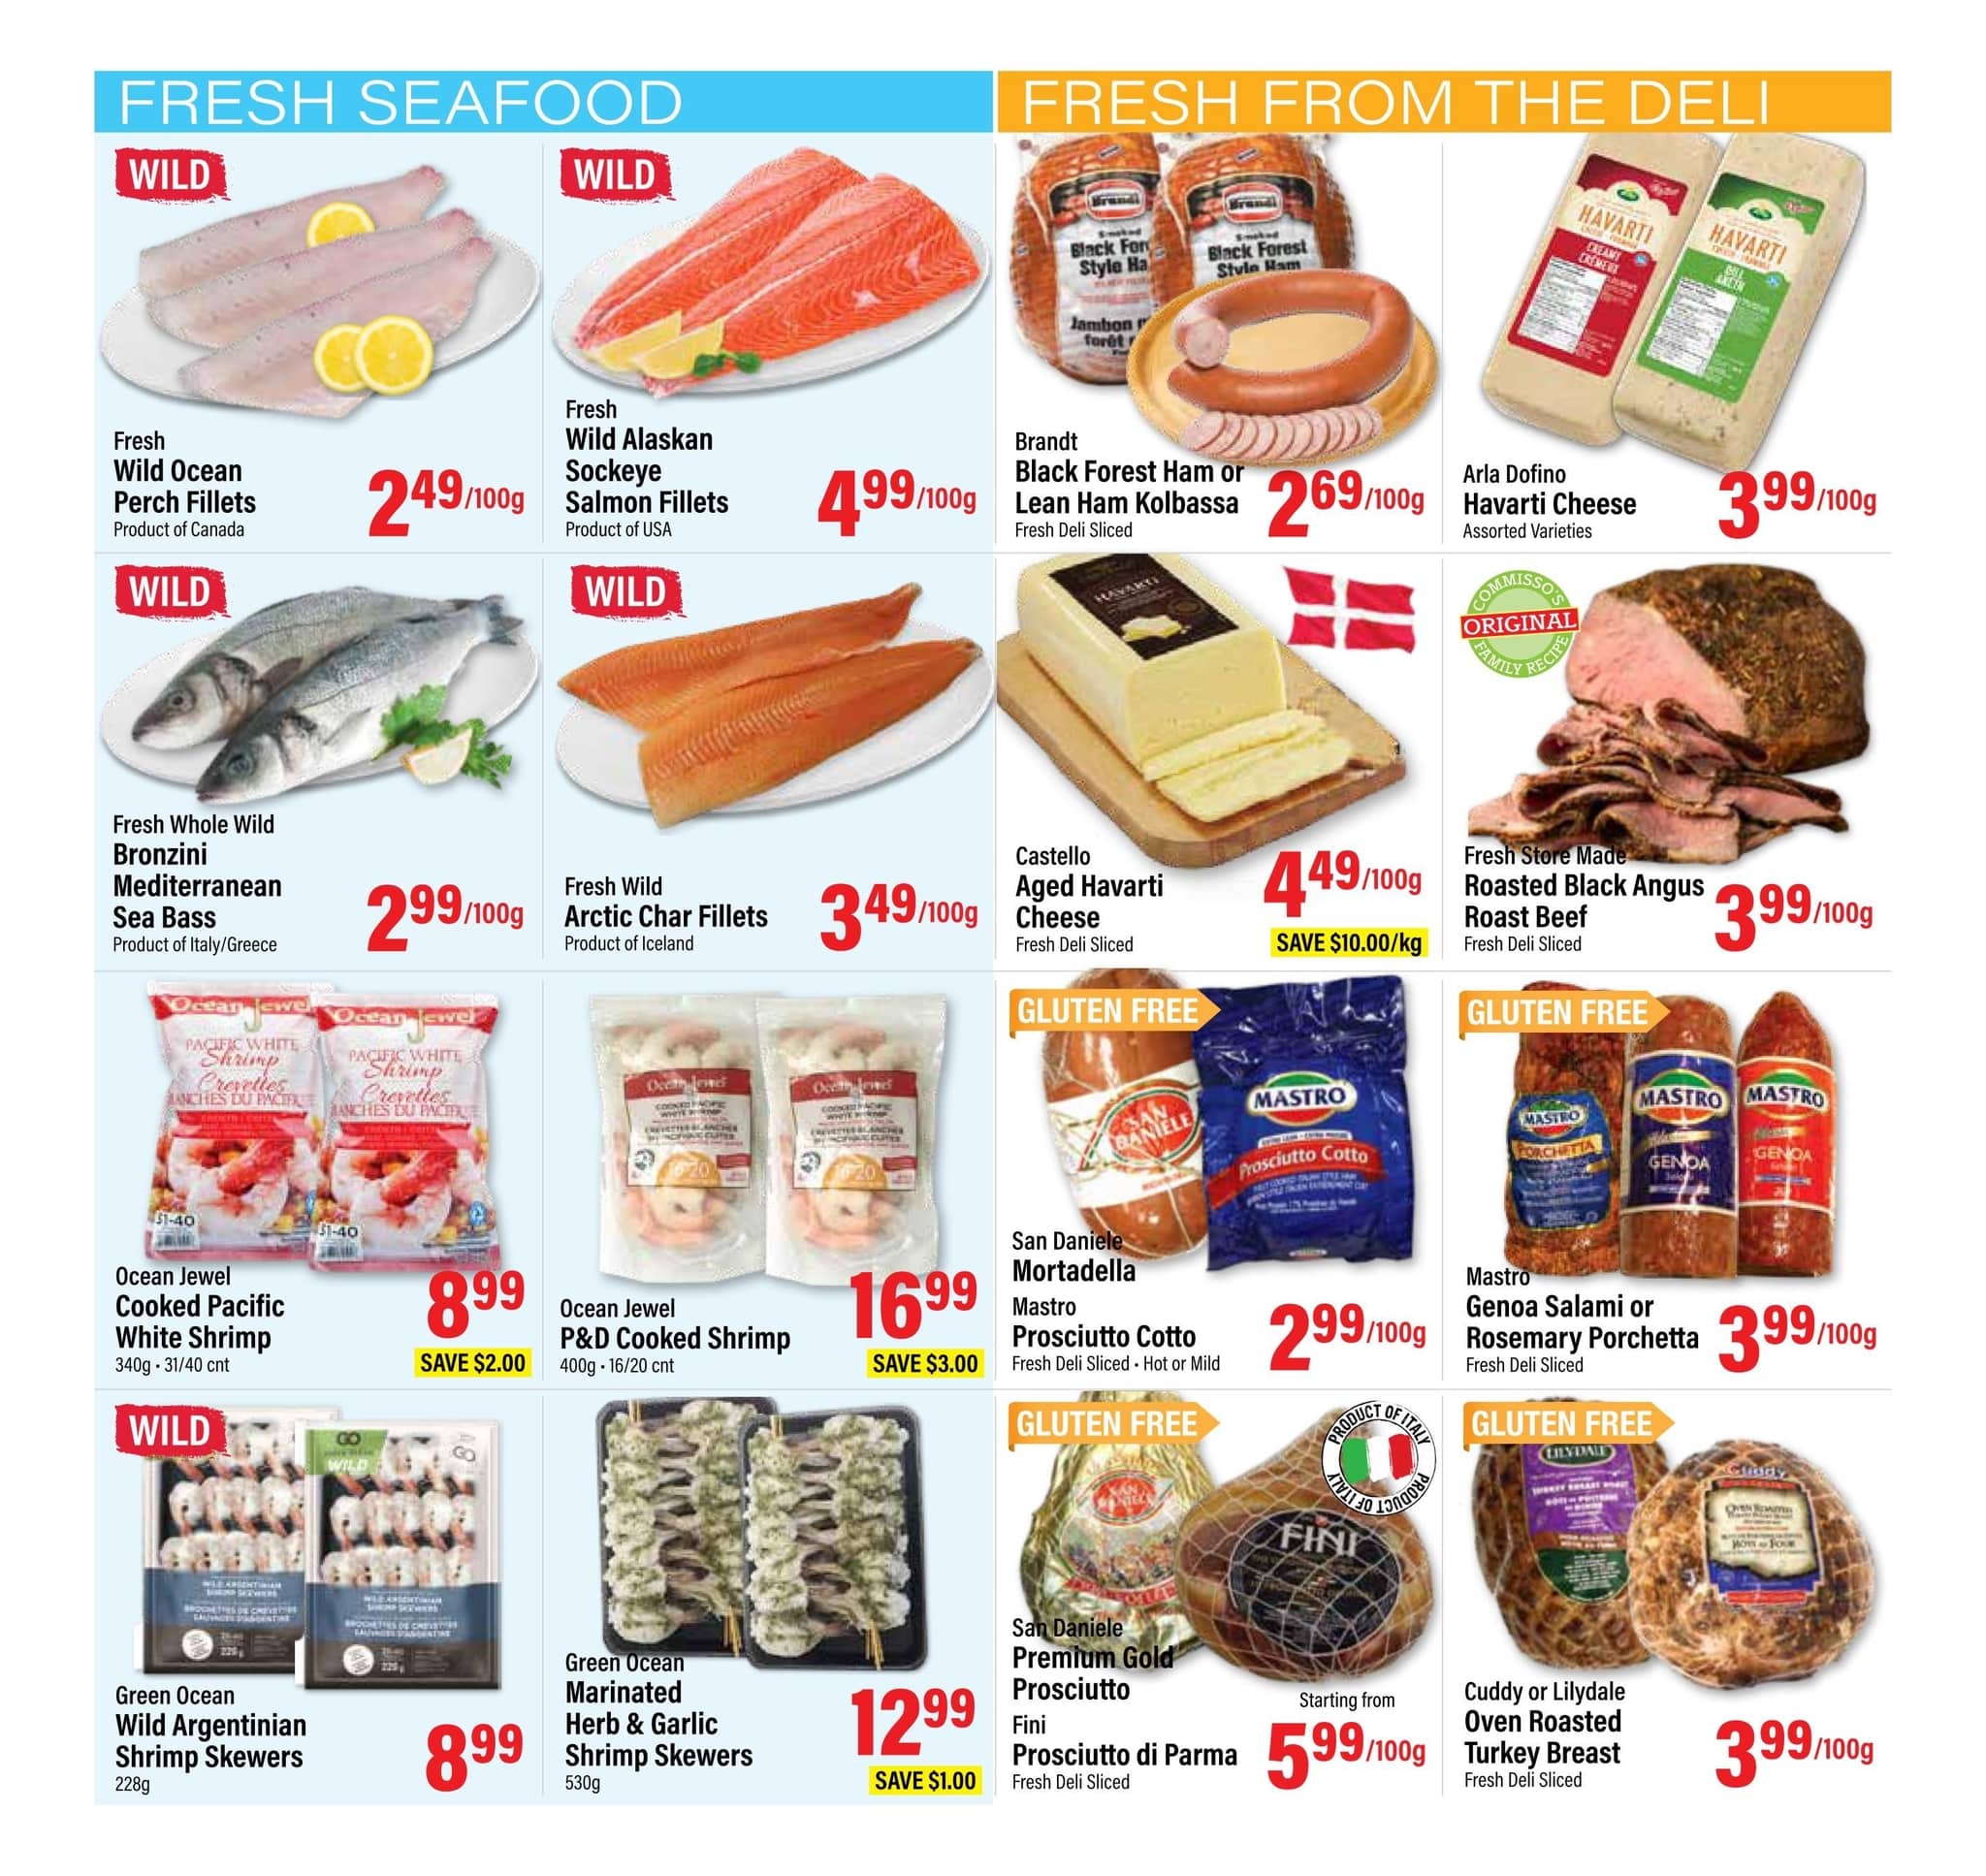 Commisso's Fresh Foods - Weekly Flyer Specials - Page 6